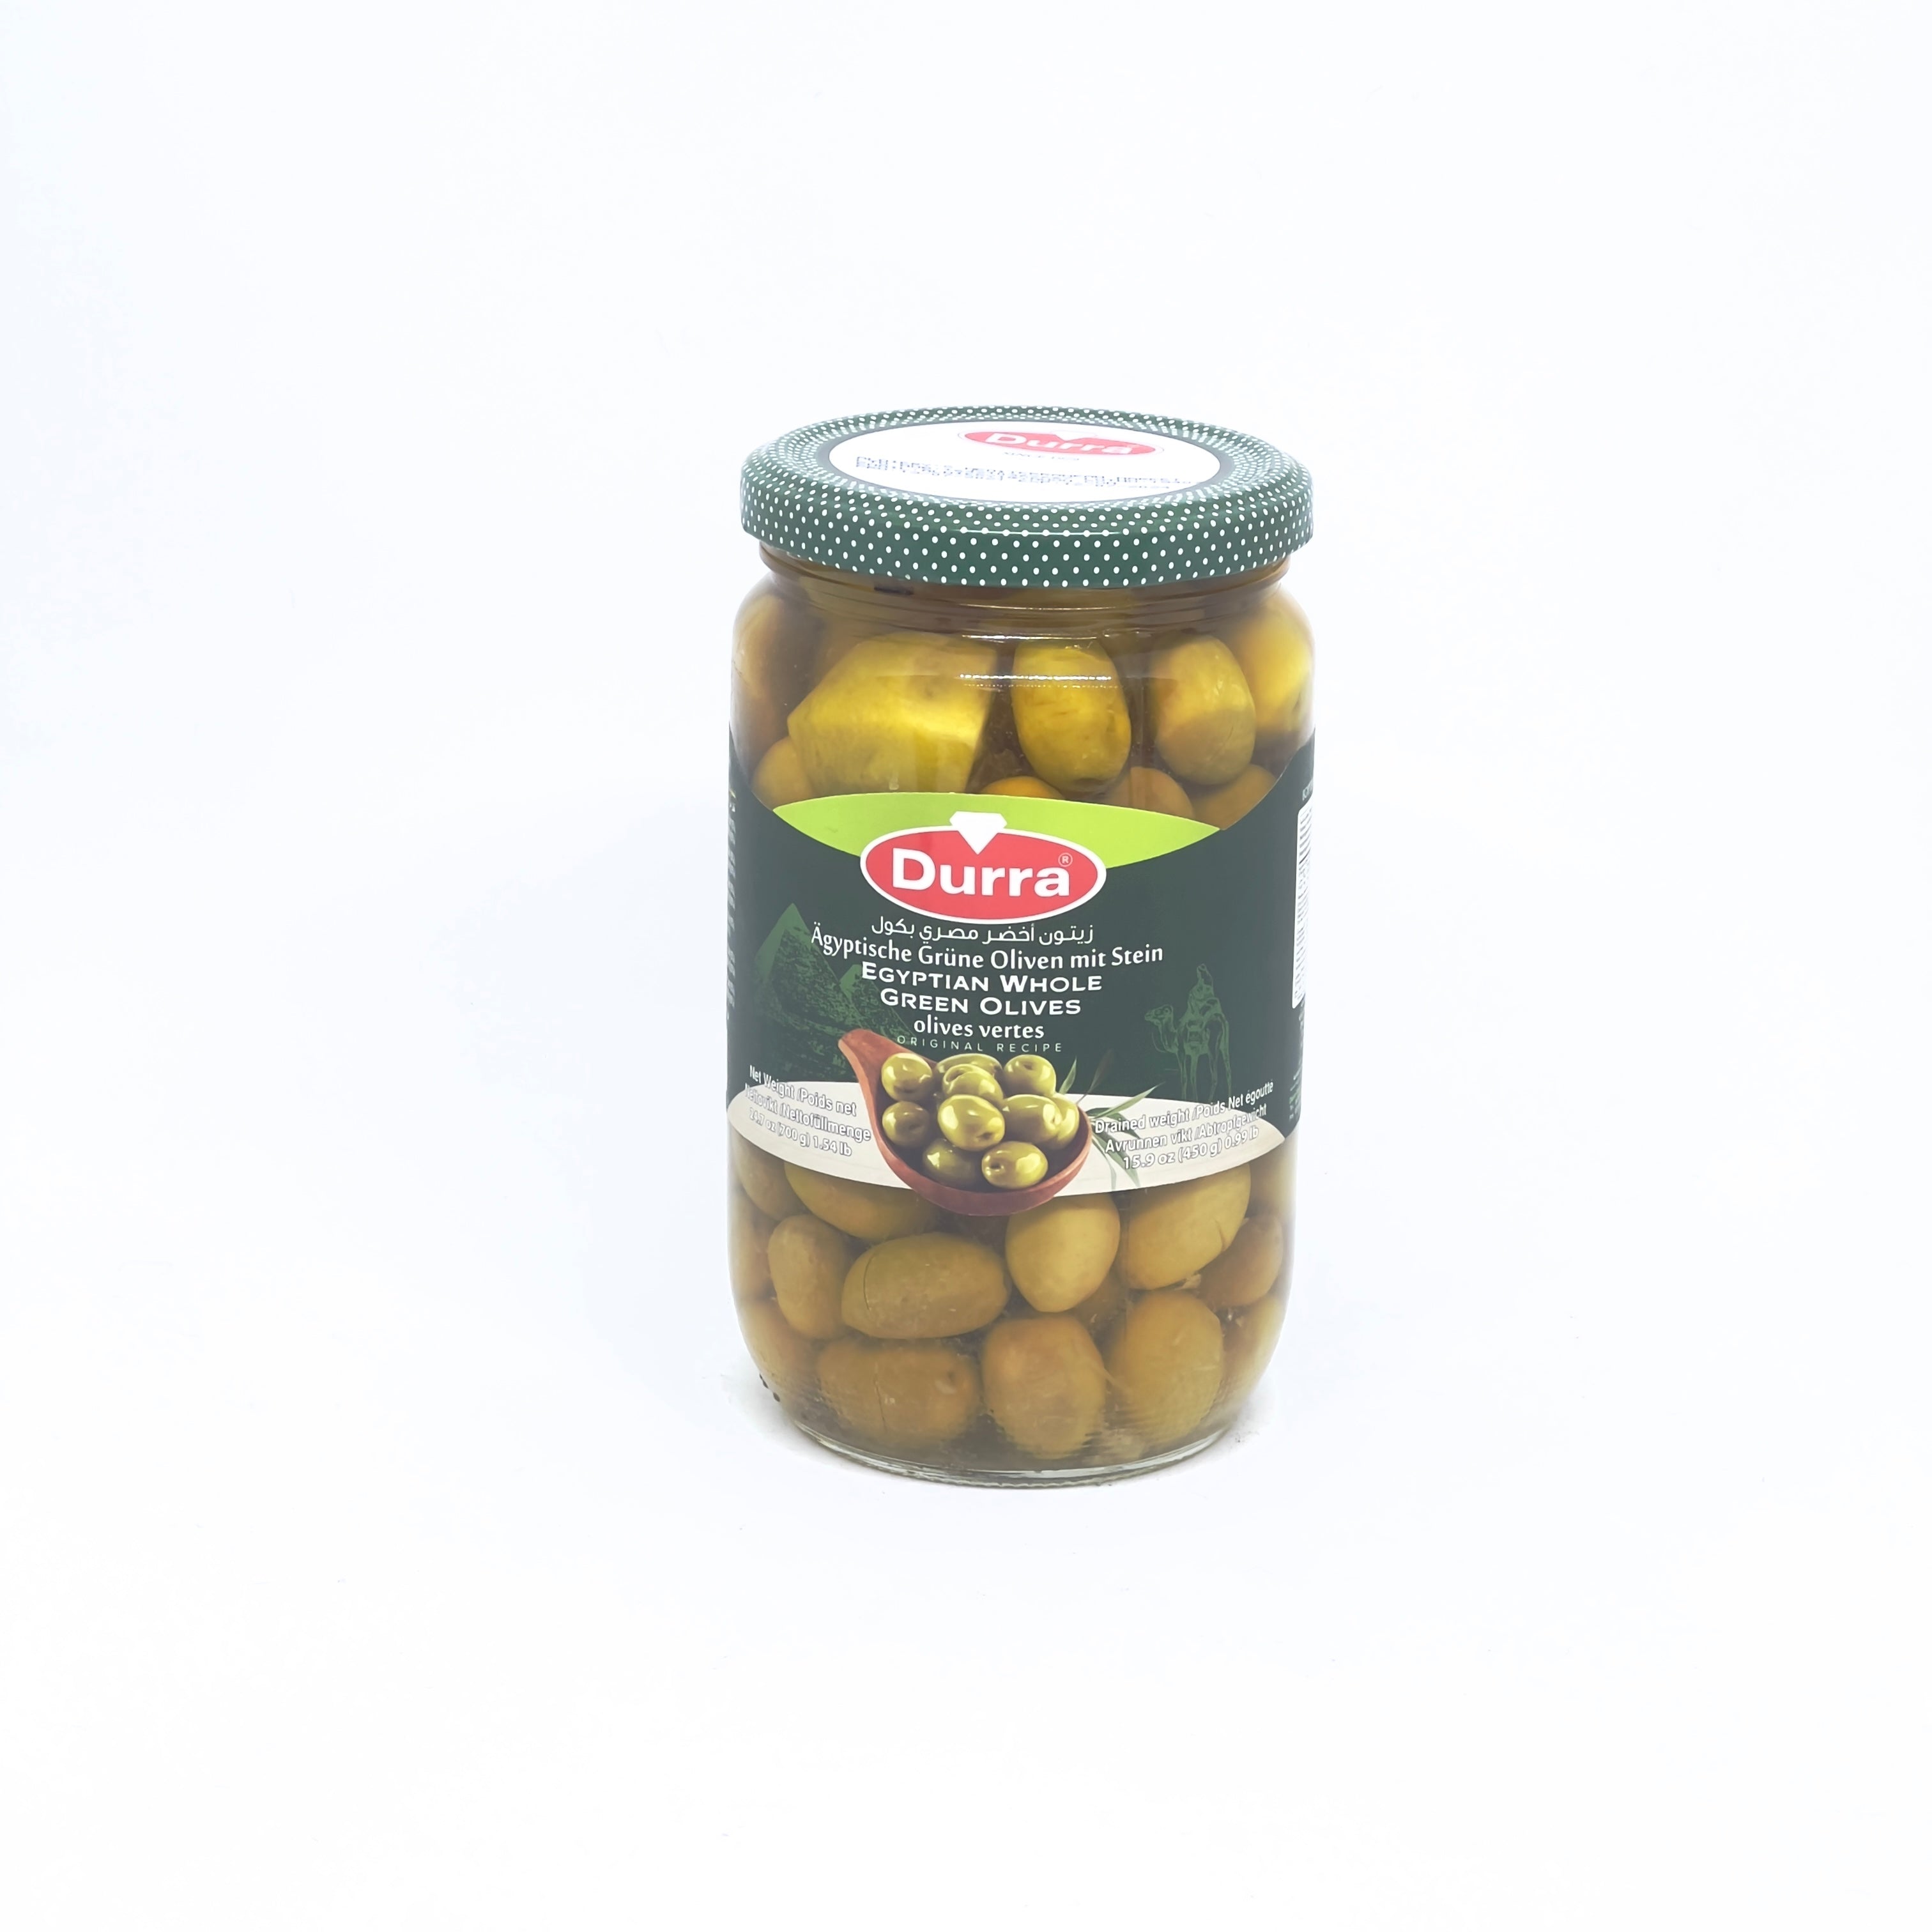 DURRA Egyptian Whole Green Olives 700g